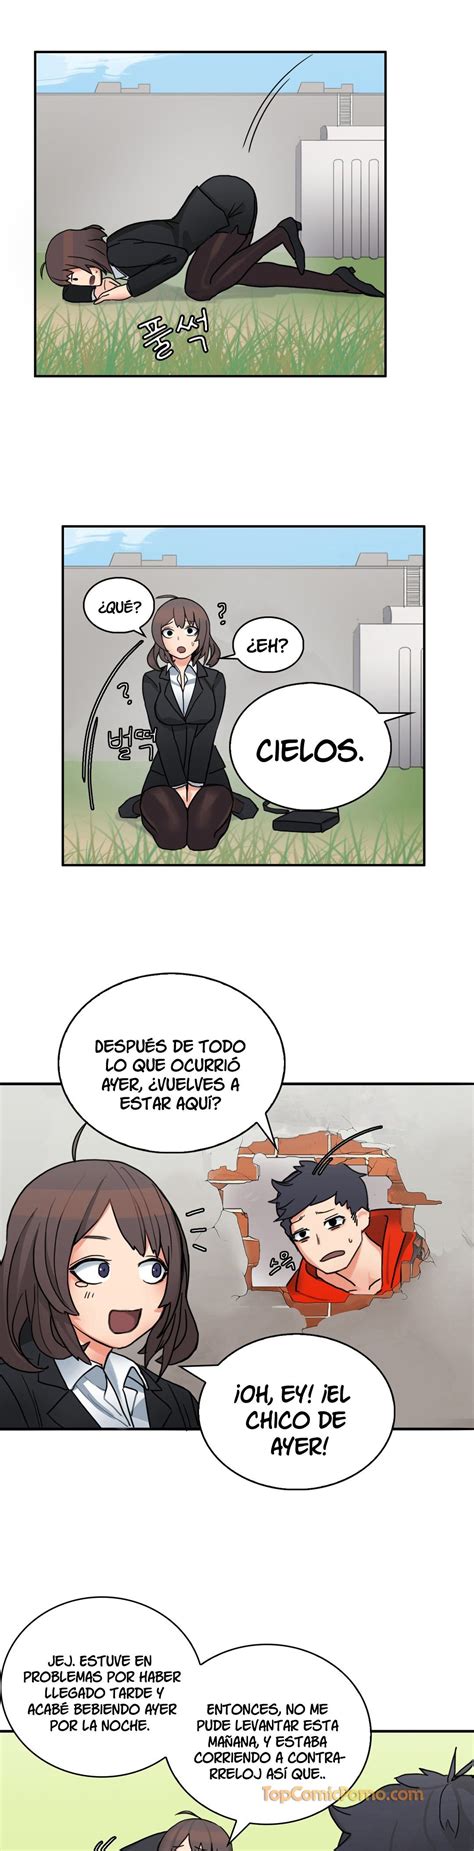 The Girl That Got Stuck in the Wall Capítulo manhwa Dragontranslation net